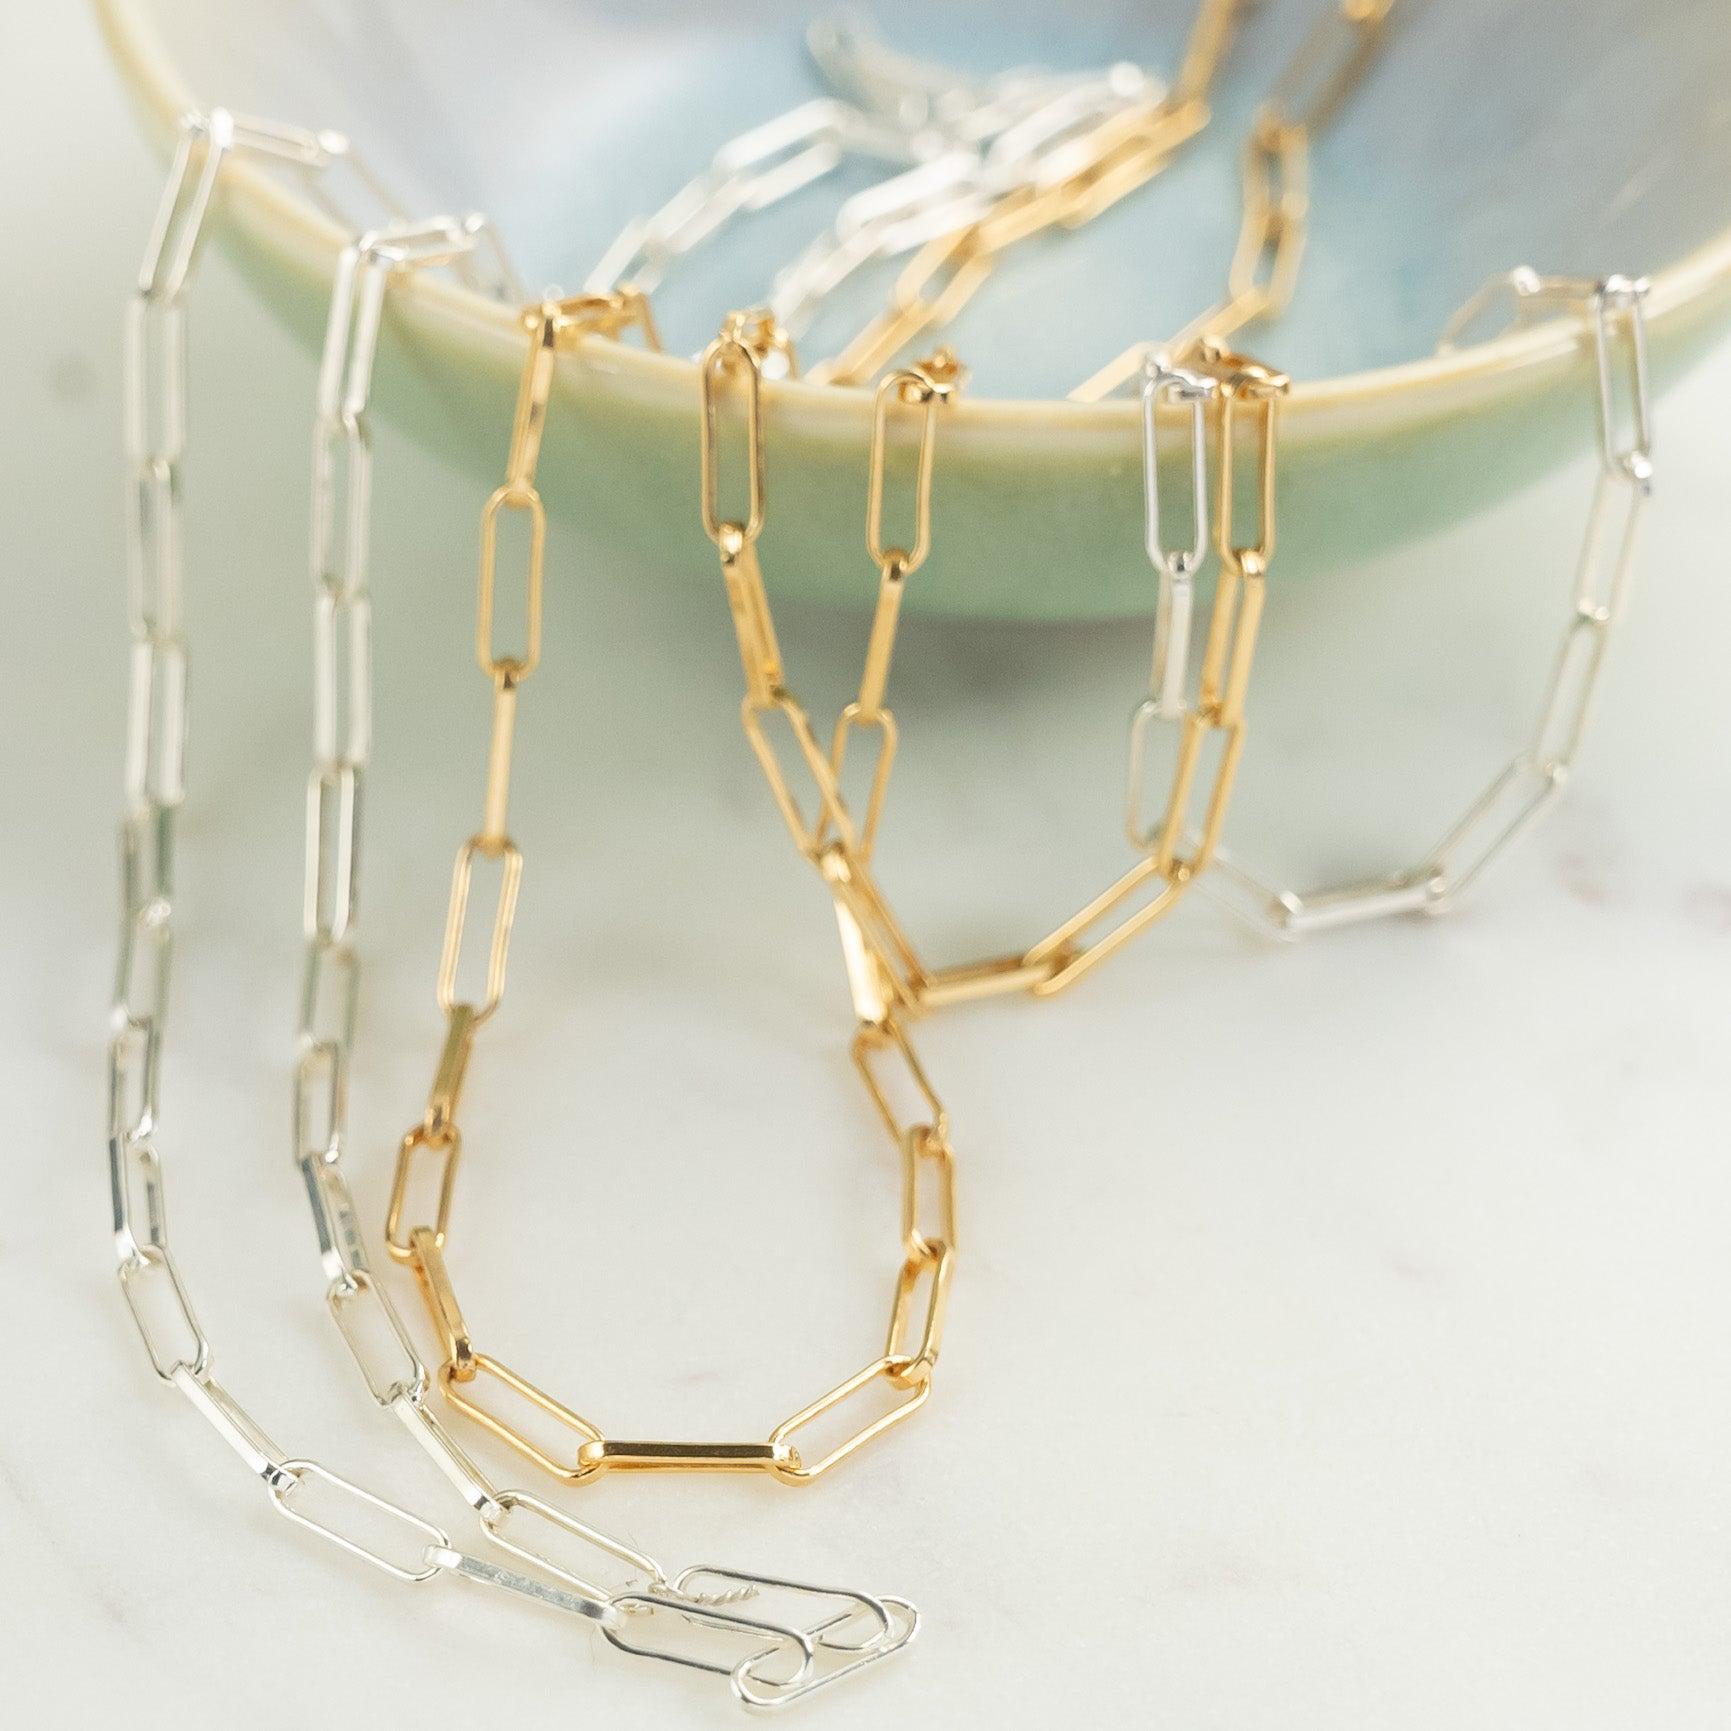 PaperClip chain link necklace or bracelet, 7-30 inches, Gold filled OR Sterling Silver